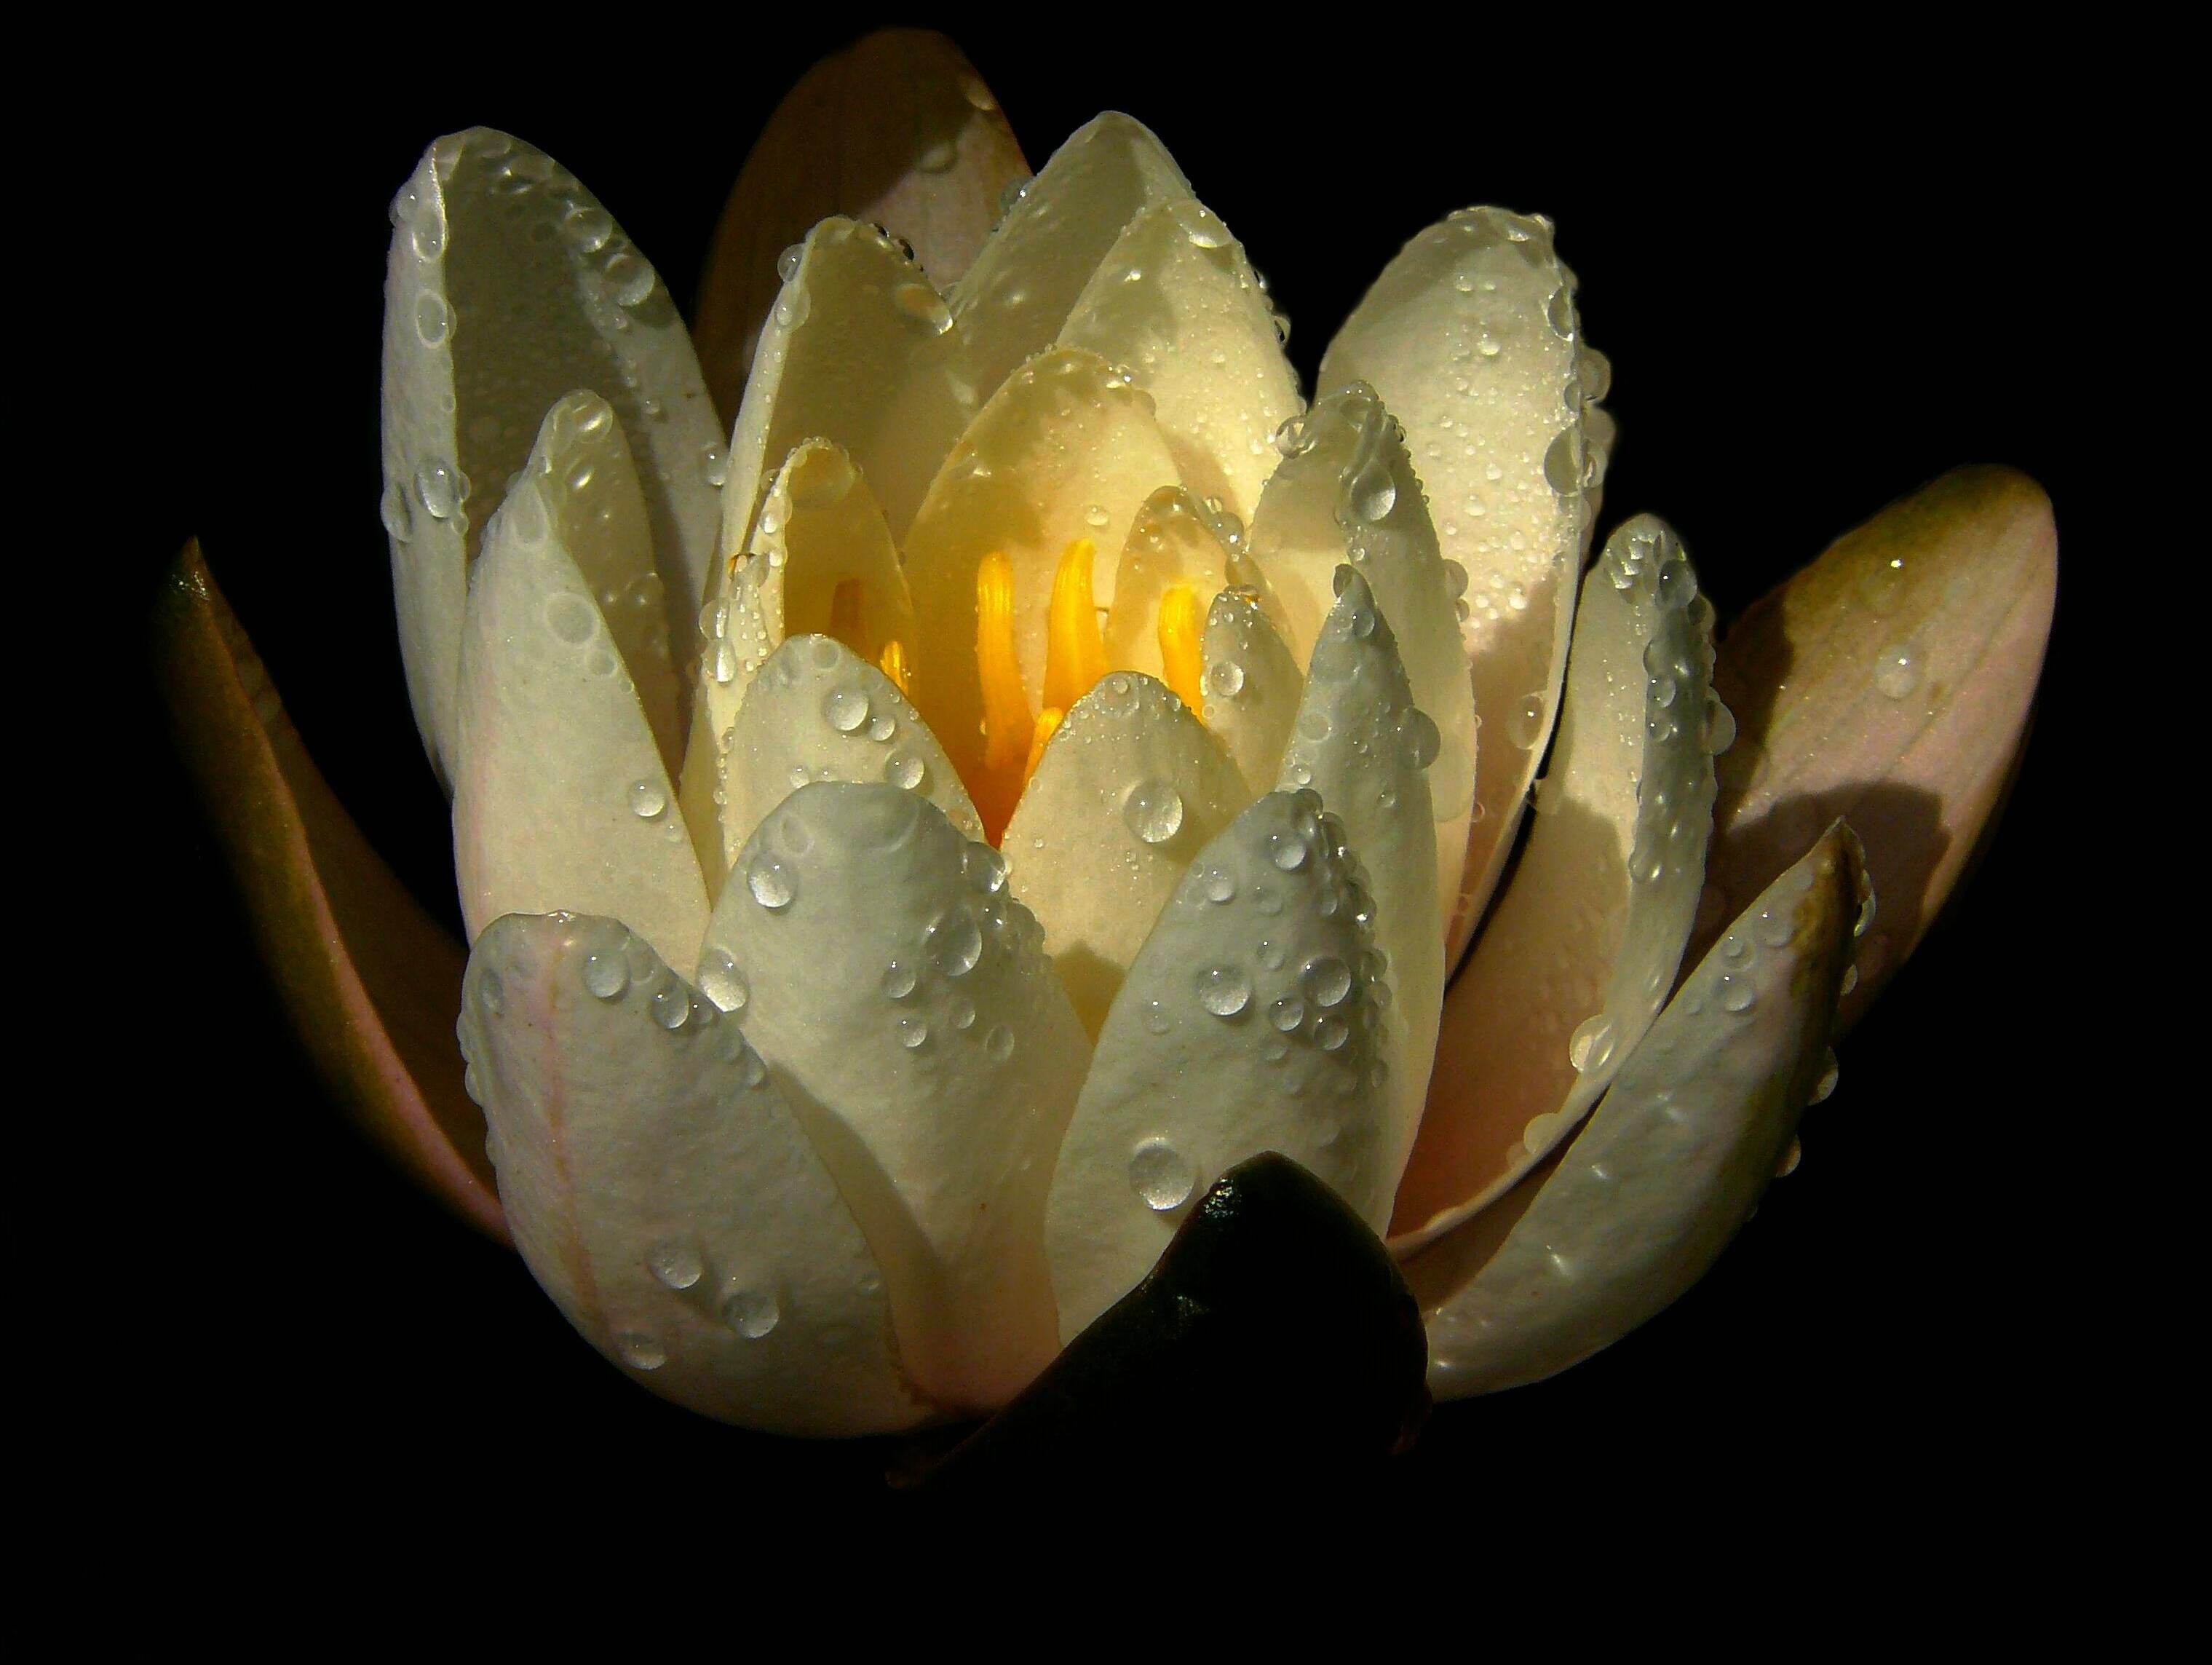 petals, flowers, drops, water lily iphone wallpaper